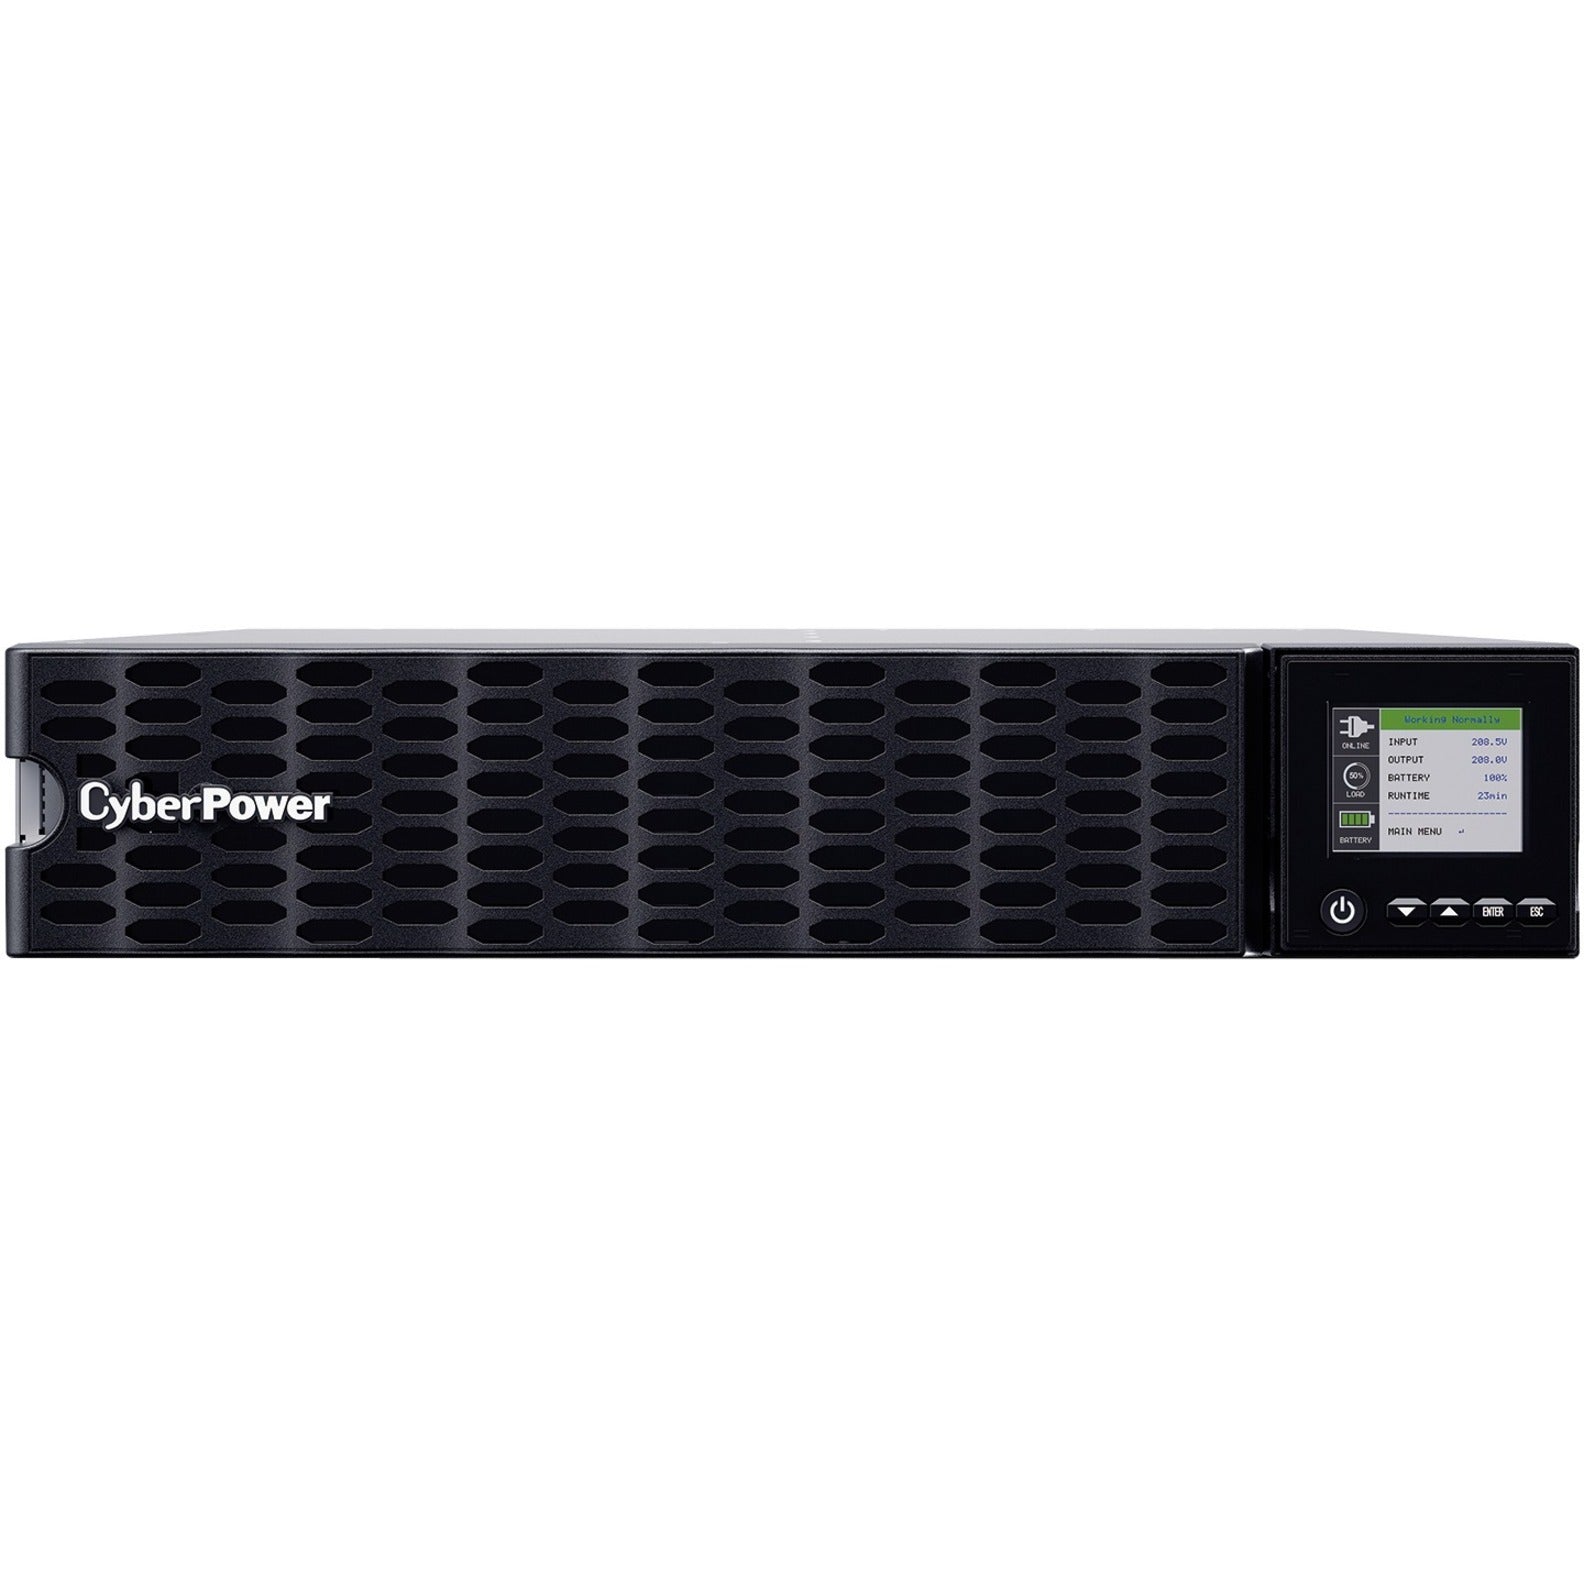 CyberPower OL5KRTHD Smart App Online UPS Systems, 5KVA Tower/Rack Convertible, Energy Saving, SNMP/HTTP Remote Monitoring